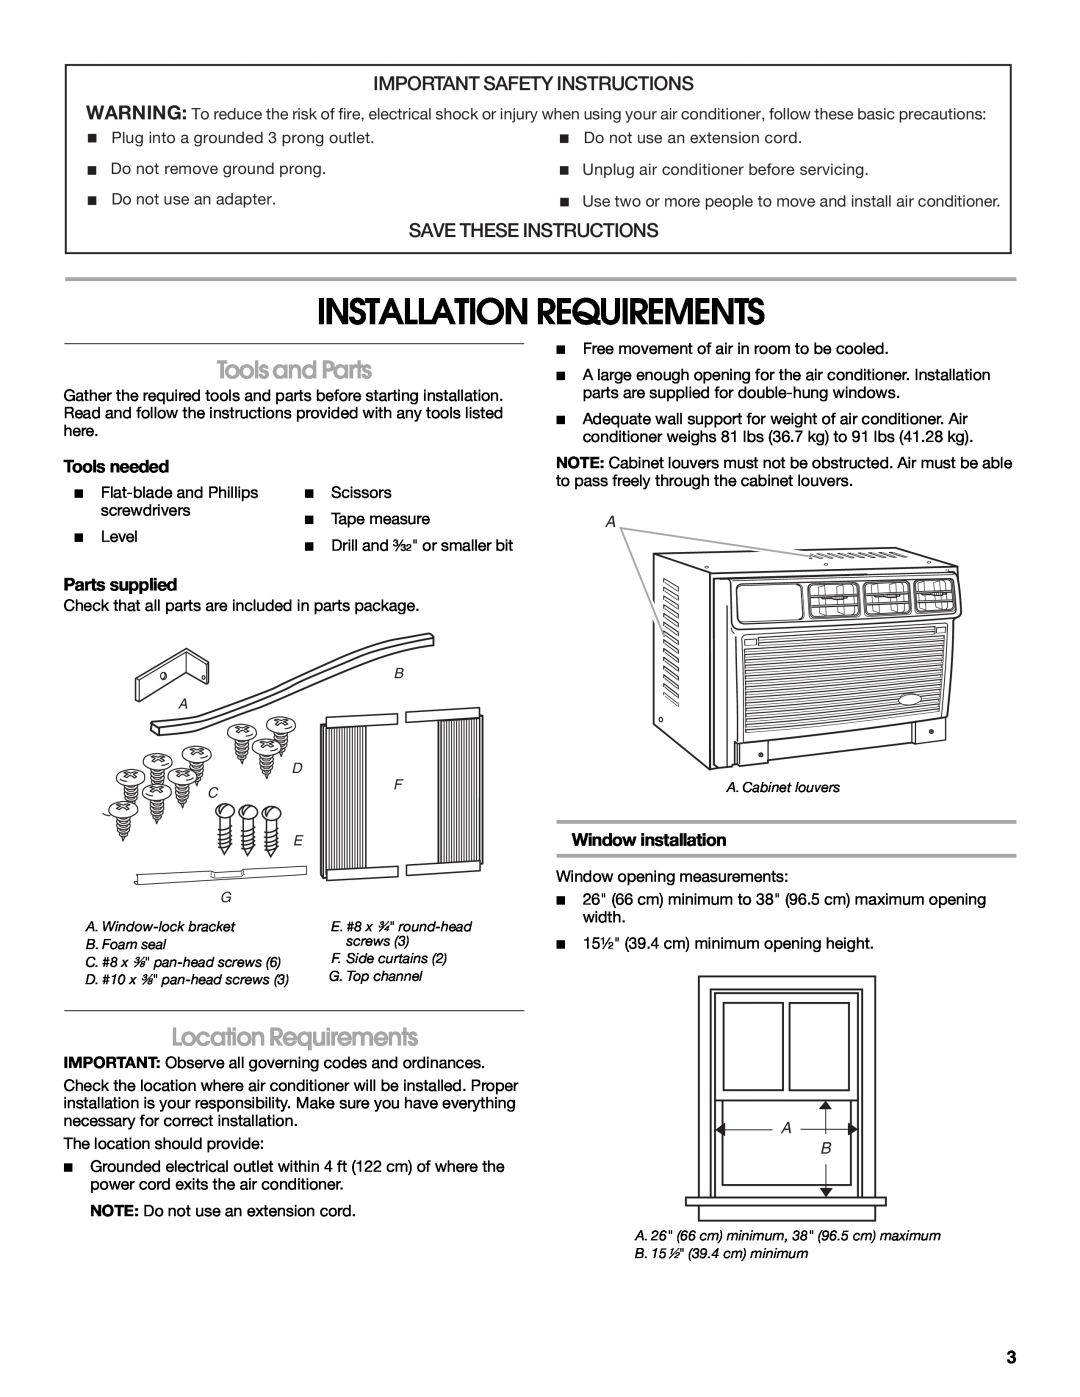 Whirlpool ACM122XR0 manual Installation Requirements, Tools and Parts, Location Requirements, Important Safety Instructions 